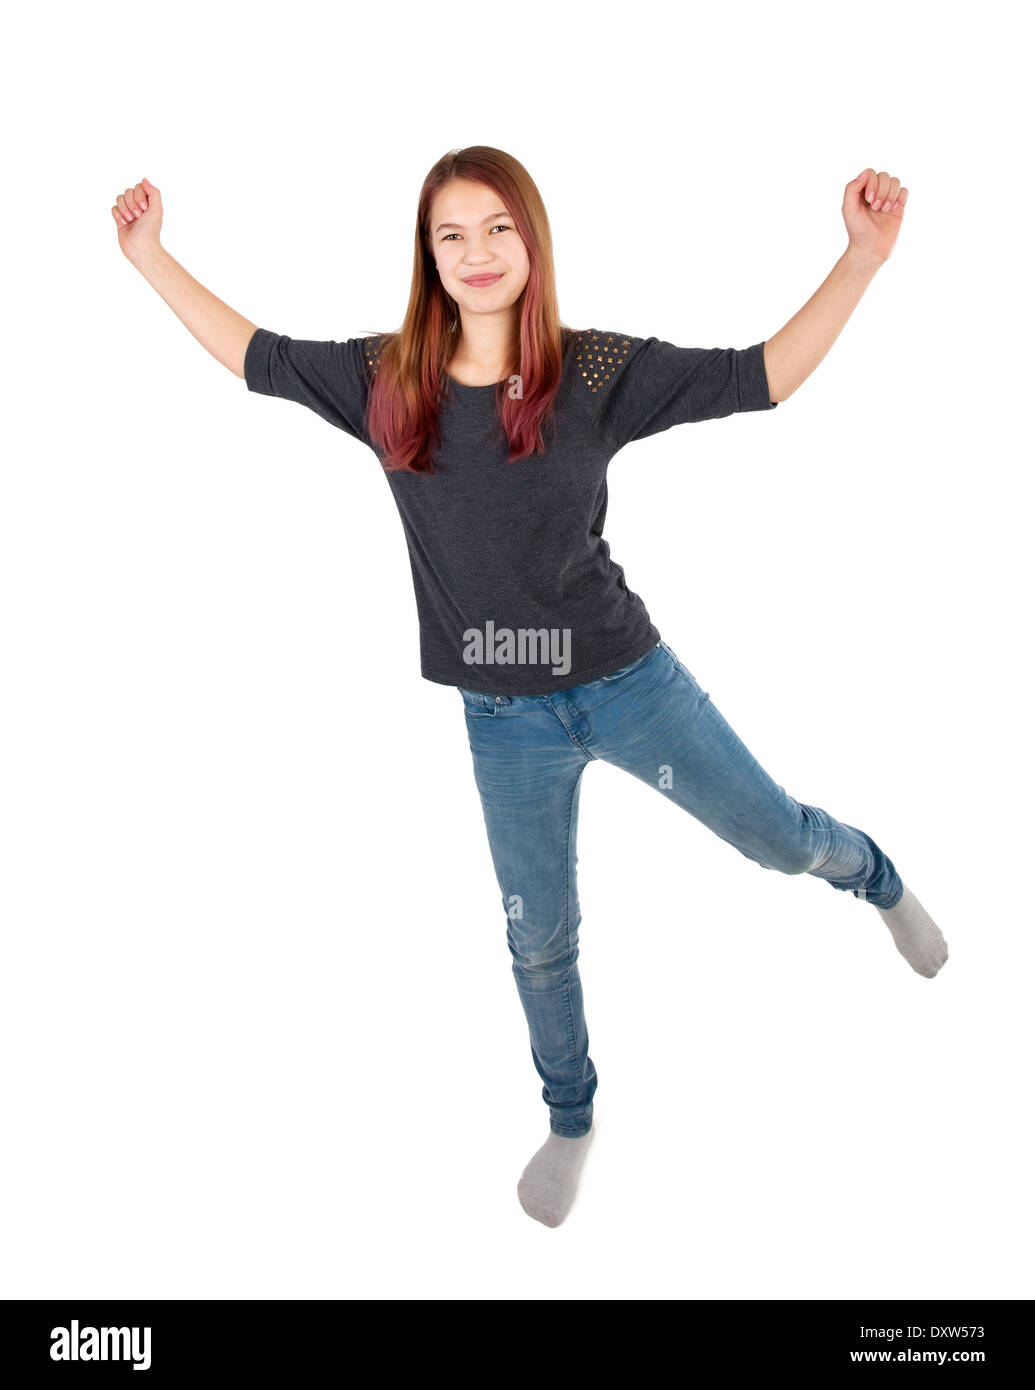 young girl jumping with arms extended Stock Photo